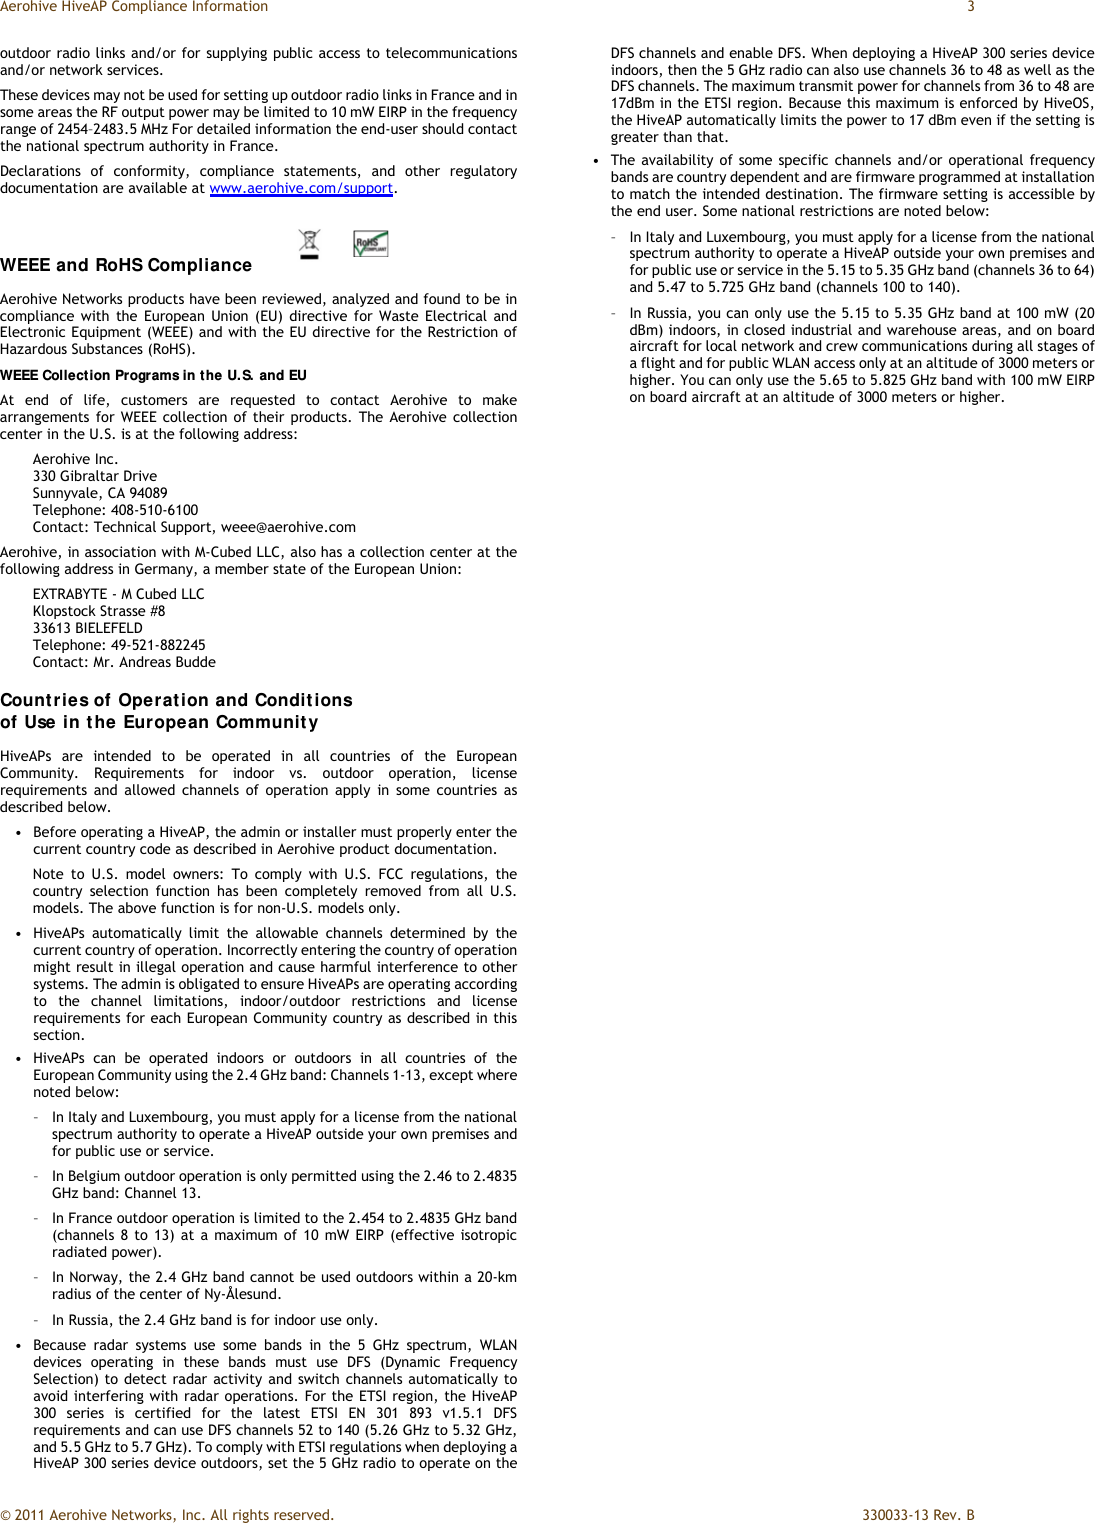 Aerohive HiveAP Compliance Information  3 © 2011 Aerohive Networks, Inc. All rights reserved.    330033-13 Rev. B outdoor radio links and/or for supplying public access to telecommunications and/or network services. These devices may not be used for setting up outdoor radio links in France and in some areas the RF output power may be limited to 10 mW EIRP in the frequency range of 2454–2483.5 MHz For detailed information the end-user should contact the national spectrum authority in France. Declarations of conformity, compliance statements, and other regulatory documentation are available at www.aerohive.com/support. WEEE and RoHS Compliance  Aerohive Networks products have been reviewed, analyzed and found to be in compliance with the European Union (EU) directive for Waste Electrical and Electronic Equipment (WEEE) and with the EU directive for the Restriction of Hazardous Substances (RoHS). WEEE Collection Programs in the U.S. and EU At end of life, customers are requested to contact Aerohive to make arrangements for WEEE collection of their products. The Aerohive collection center in the U.S. is at the following address: Aerohive Inc.  330 Gibraltar Drive Sunnyvale, CA 94089 Telephone: 408-510-6100 Contact: Technical Support, weee@aerohive.com Aerohive, in association with M-Cubed LLC, also has a collection center at the following address in Germany, a member state of the European Union: EXTRABYTE - M Cubed LLC Klopstock Strasse #8 33613 BIELEFELD Telephone: 49-521-882245 Contact: Mr. Andreas Budde Countries of Operation and Conditions  of Use in the European Community HiveAPs are intended to be operated in all countries of the European Community. Requirements for indoor vs. outdoor operation, license requirements and allowed channels of operation apply in some countries as described below. •   Before operating a HiveAP, the admin or installer must properly enter the current country code as described in Aerohive product documentation. Note to U.S. model owners: To comply with U.S. FCC regulations, the country selection function has been completely removed from all U.S. models. The above function is for non-U.S. models only.  •   HiveAPs automatically limit the allowable channels determined by the current country of operation. Incorrectly entering the country of operation might result in illegal operation and cause harmful interference to other systems. The admin is obligated to ensure HiveAPs are operating according to the channel limitations, indoor/outdoor restrictions and license requirements for each European Community country as described in this section. •   HiveAPs can be operated indoors or outdoors in all countries of the European Community using the 2.4 GHz band: Channels 1-13, except where noted below: –   In Italy and Luxembourg, you must apply for a license from the national spectrum authority to operate a HiveAP outside your own premises and for public use or service. –   In Belgium outdoor operation is only permitted using the 2.46 to 2.4835 GHz band: Channel 13. –   In France outdoor operation is limited to the 2.454 to 2.4835 GHz band (channels 8 to 13) at a maximum of 10 mW EIRP (effective isotropic radiated power). –   In Norway, the 2.4 GHz band cannot be used outdoors within a 20-km radius of the center of Ny-Ålesund. –   In Russia, the 2.4 GHz band is for indoor use only. •   Because radar systems use some bands in the 5 GHz spectrum, WLAN devices operating in these bands must use DFS (Dynamic Frequency Selection) to detect radar activity and switch channels automatically to avoid interfering with radar operations. For the ETSI region, the HiveAP 300 series is certified for the latest ETSI EN 301 893 v1.5.1 DFS requirements and can use DFS channels 52 to 140 (5.26 GHz to 5.32 GHz, and 5.5 GHz to 5.7 GHz). To comply with ETSI regulations when deploying a HiveAP 300 series device outdoors, set the 5 GHz radio to operate on the DFS channels and enable DFS. When deploying a HiveAP 300 series device indoors, then the 5 GHz radio can also use channels 36 to 48 as well as the DFS channels. The maximum transmit power for channels from 36 to 48 are 17dBm in the ETSI region. Because this maximum is enforced by HiveOS, the HiveAP automatically limits the power to 17 dBm even if the setting is greater than that. •   The availability of some specific channels and/or operational frequency bands are country dependent and are firmware programmed at installation to match the intended destination. The firmware setting is accessible by the end user. Some national restrictions are noted below: –   In Italy and Luxembourg, you must apply for a license from the national spectrum authority to operate a HiveAP outside your own premises and for public use or service in the 5.15 to 5.35 GHz band (channels 36 to 64) and 5.47 to 5.725 GHz band (channels 100 to 140). –   In Russia, you can only use the 5.15 to 5.35 GHz band at 100 mW (20 dBm) indoors, in closed industrial and warehouse areas, and on board aircraft for local network and crew communications during all stages of a flight and for public WLAN access only at an altitude of 3000 meters or higher. You can only use the 5.65 to 5.825 GHz band with 100 mW EIRP on board aircraft at an altitude of 3000 meters or higher. 